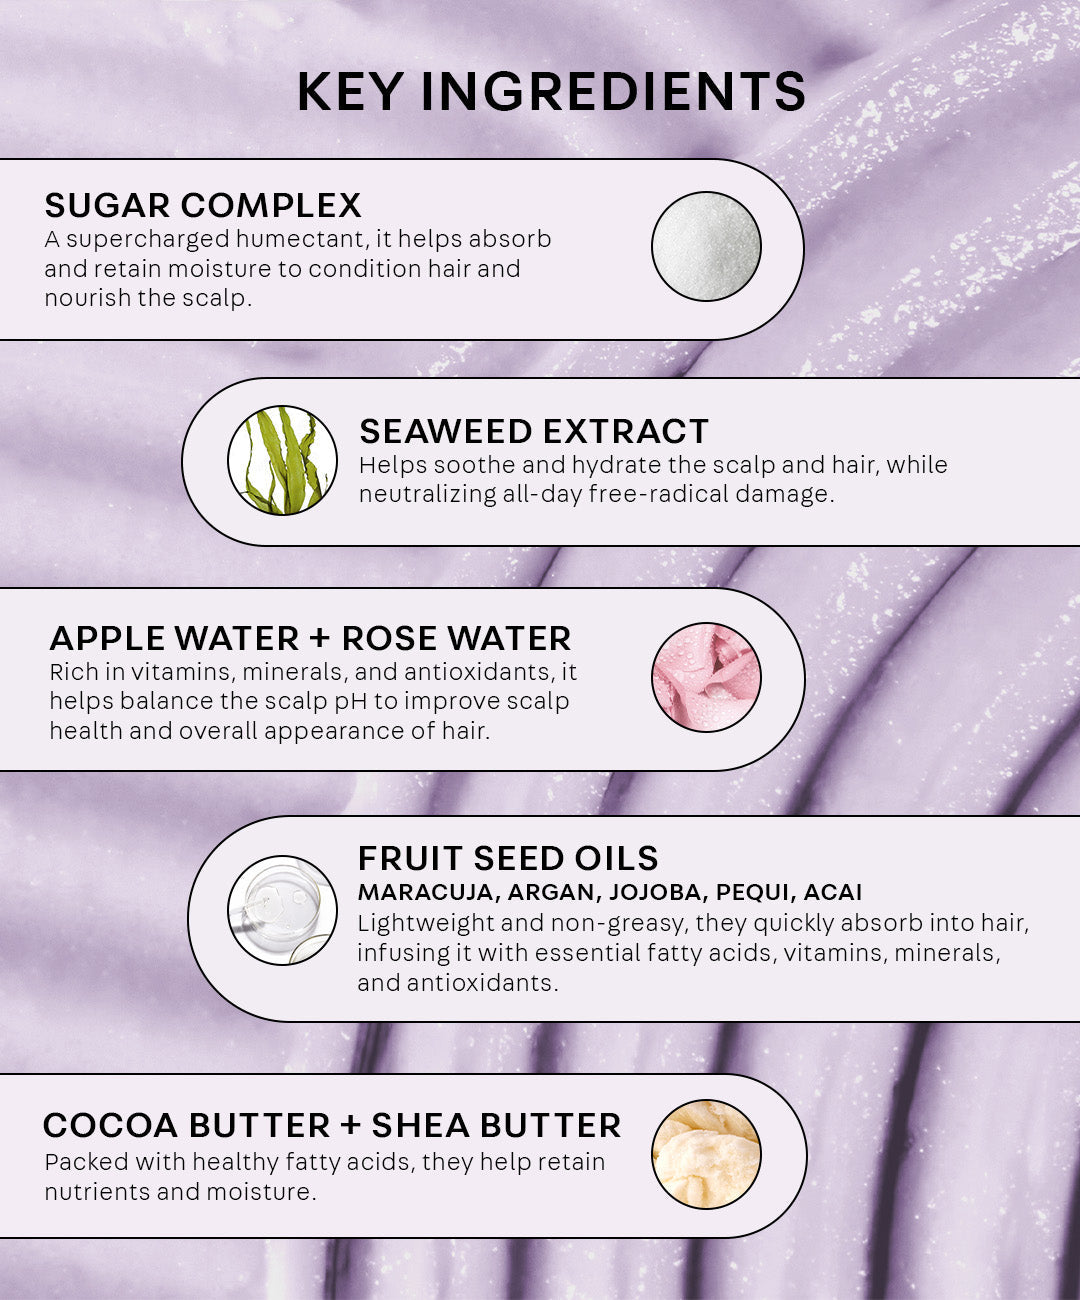 Sugar Complex: a supercharged humectant, it helps absorb and retain moisture to condition hair and nourish the scalp. Seaweed extract: helps soothe and hydrate the scalp and hair, while neutralizing all day free-radical damage. Apple and Rose Water: Rich and vitamins, minerals and antioxidants, they help balance the scalp pH to improve scalp health and overall appearance of hair. Fruit seed oils - maracuja, argan, jojoba, pequi, acai. Lightweight and non-greasy, they quickly absorb into hair,